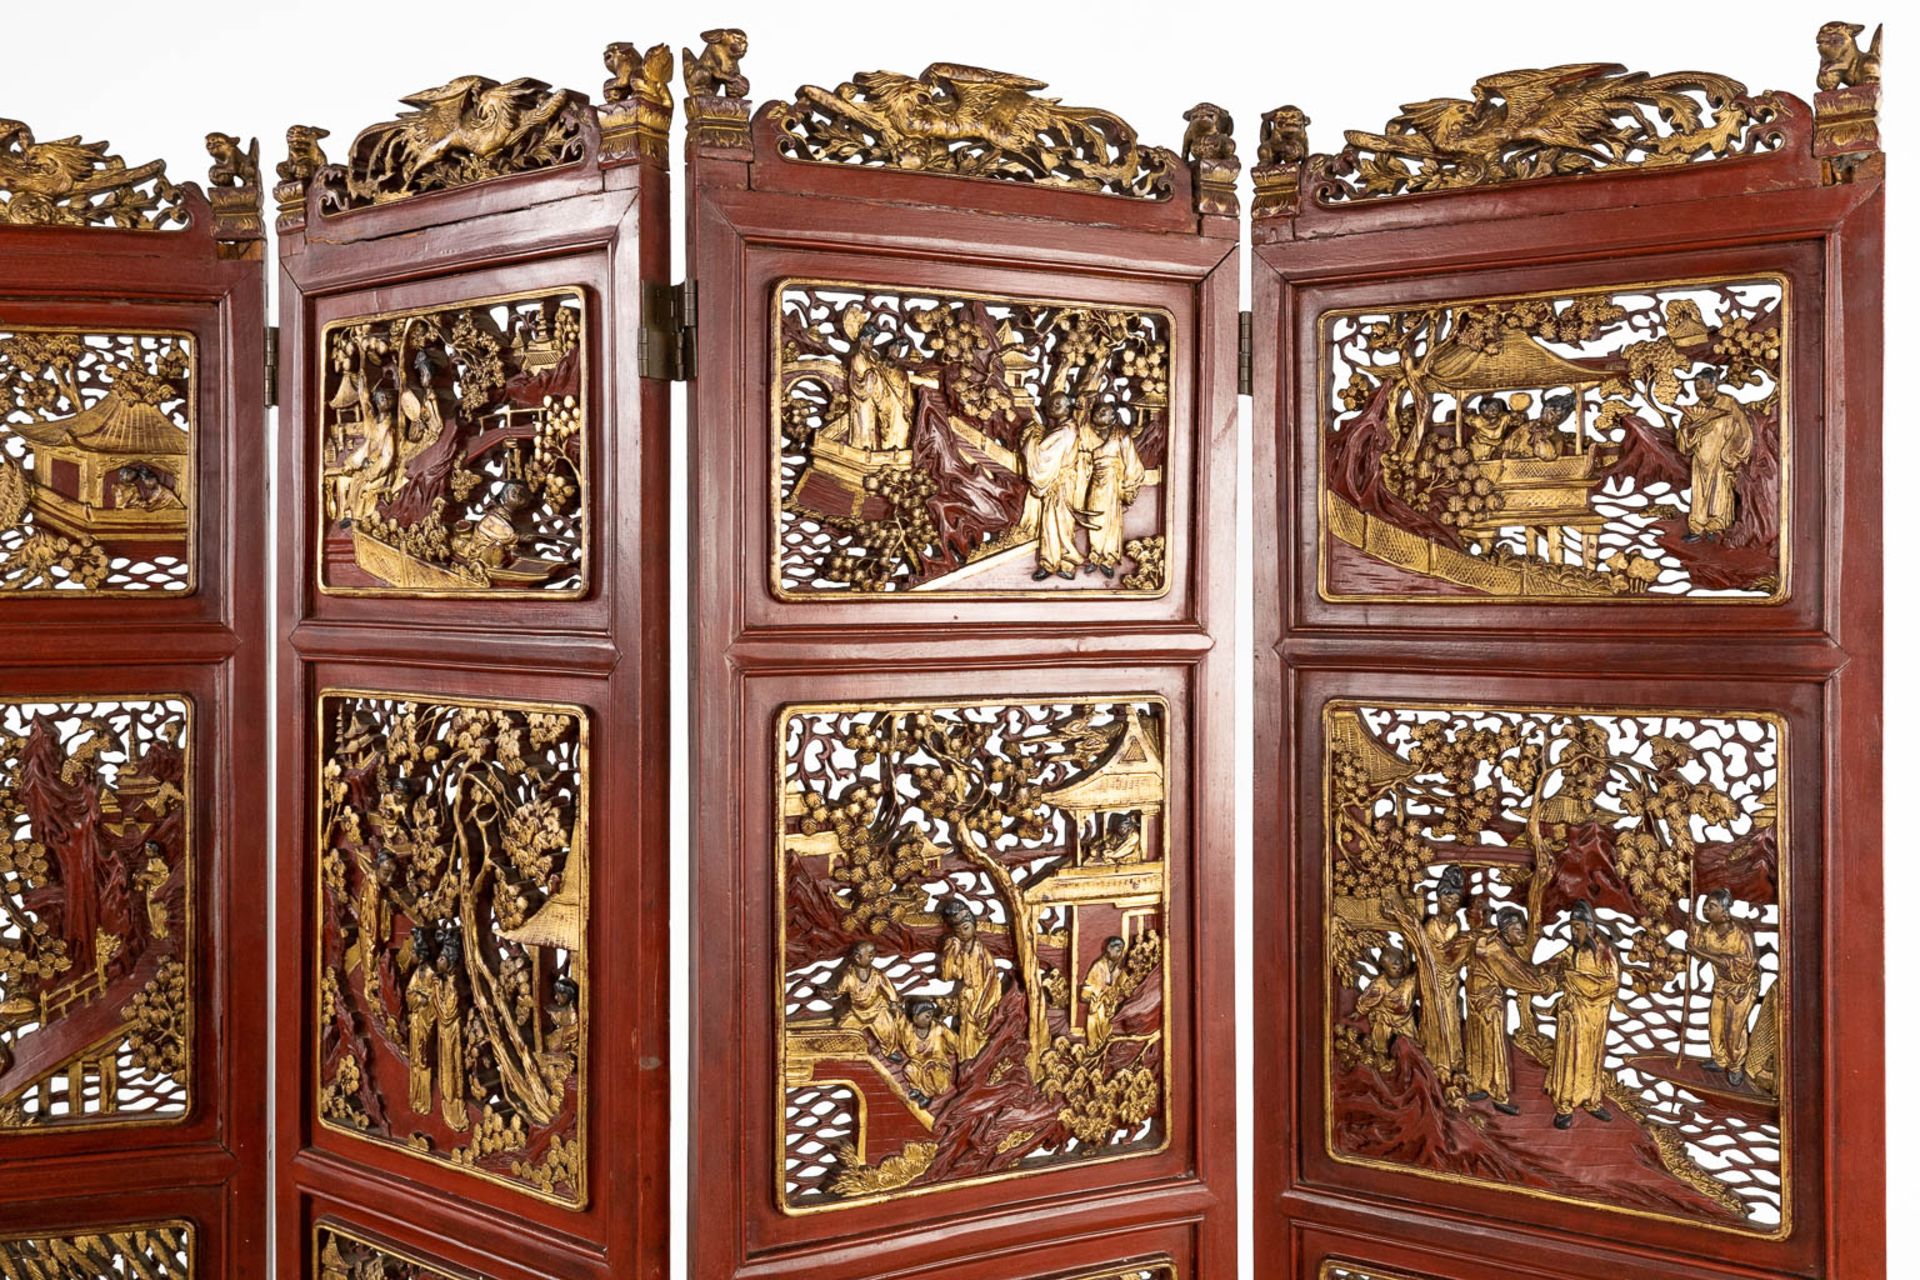 A 4-piece Chinese room divider, sculptured hardwood panels, circa 1900. (W:162 x H:185 cm) - Image 5 of 12